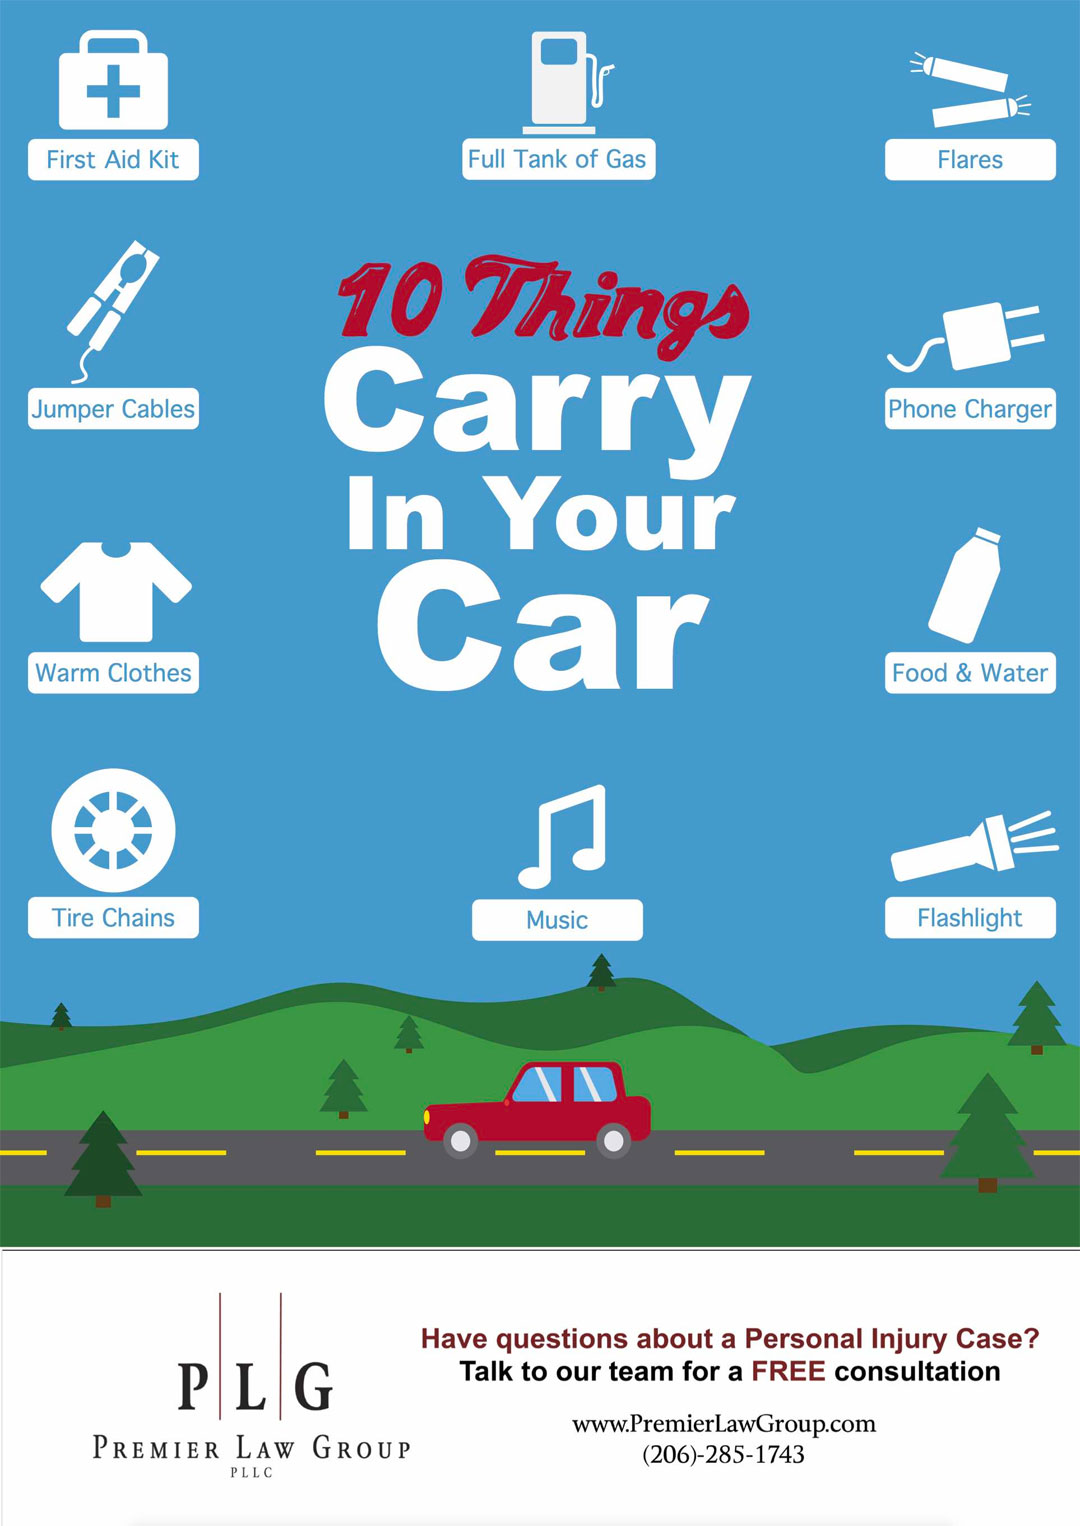 Premier Law Group Team shares 10 things you should carry in your car